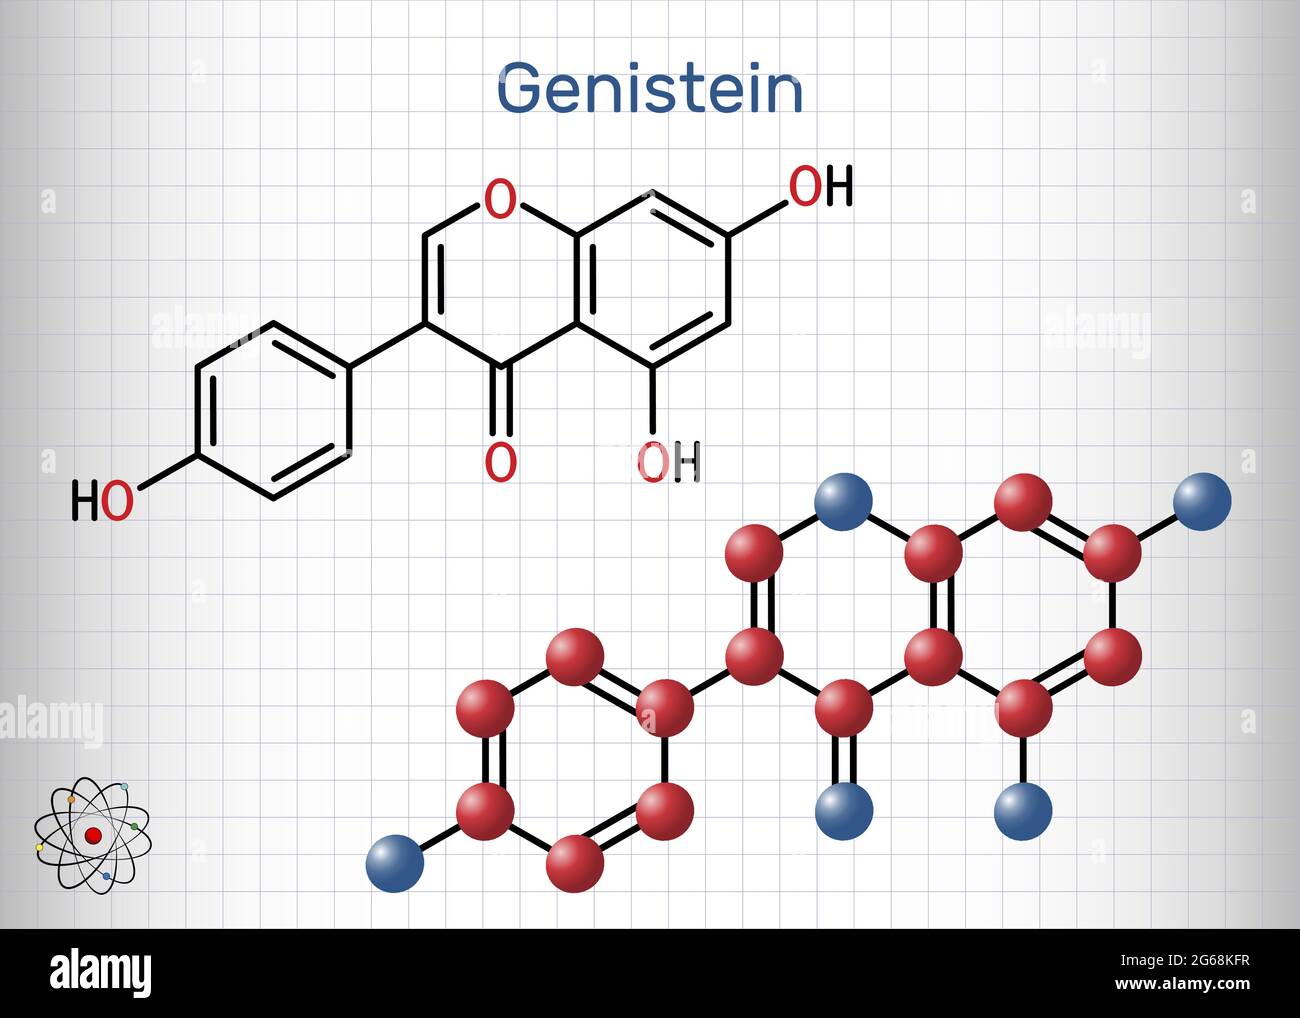 Genistein molecule. It is phytoestrogen, plant metabolite, isoflavone extract from soy with antioxidant and phytoestrogenic properties. Sheet of paper Stock Vector